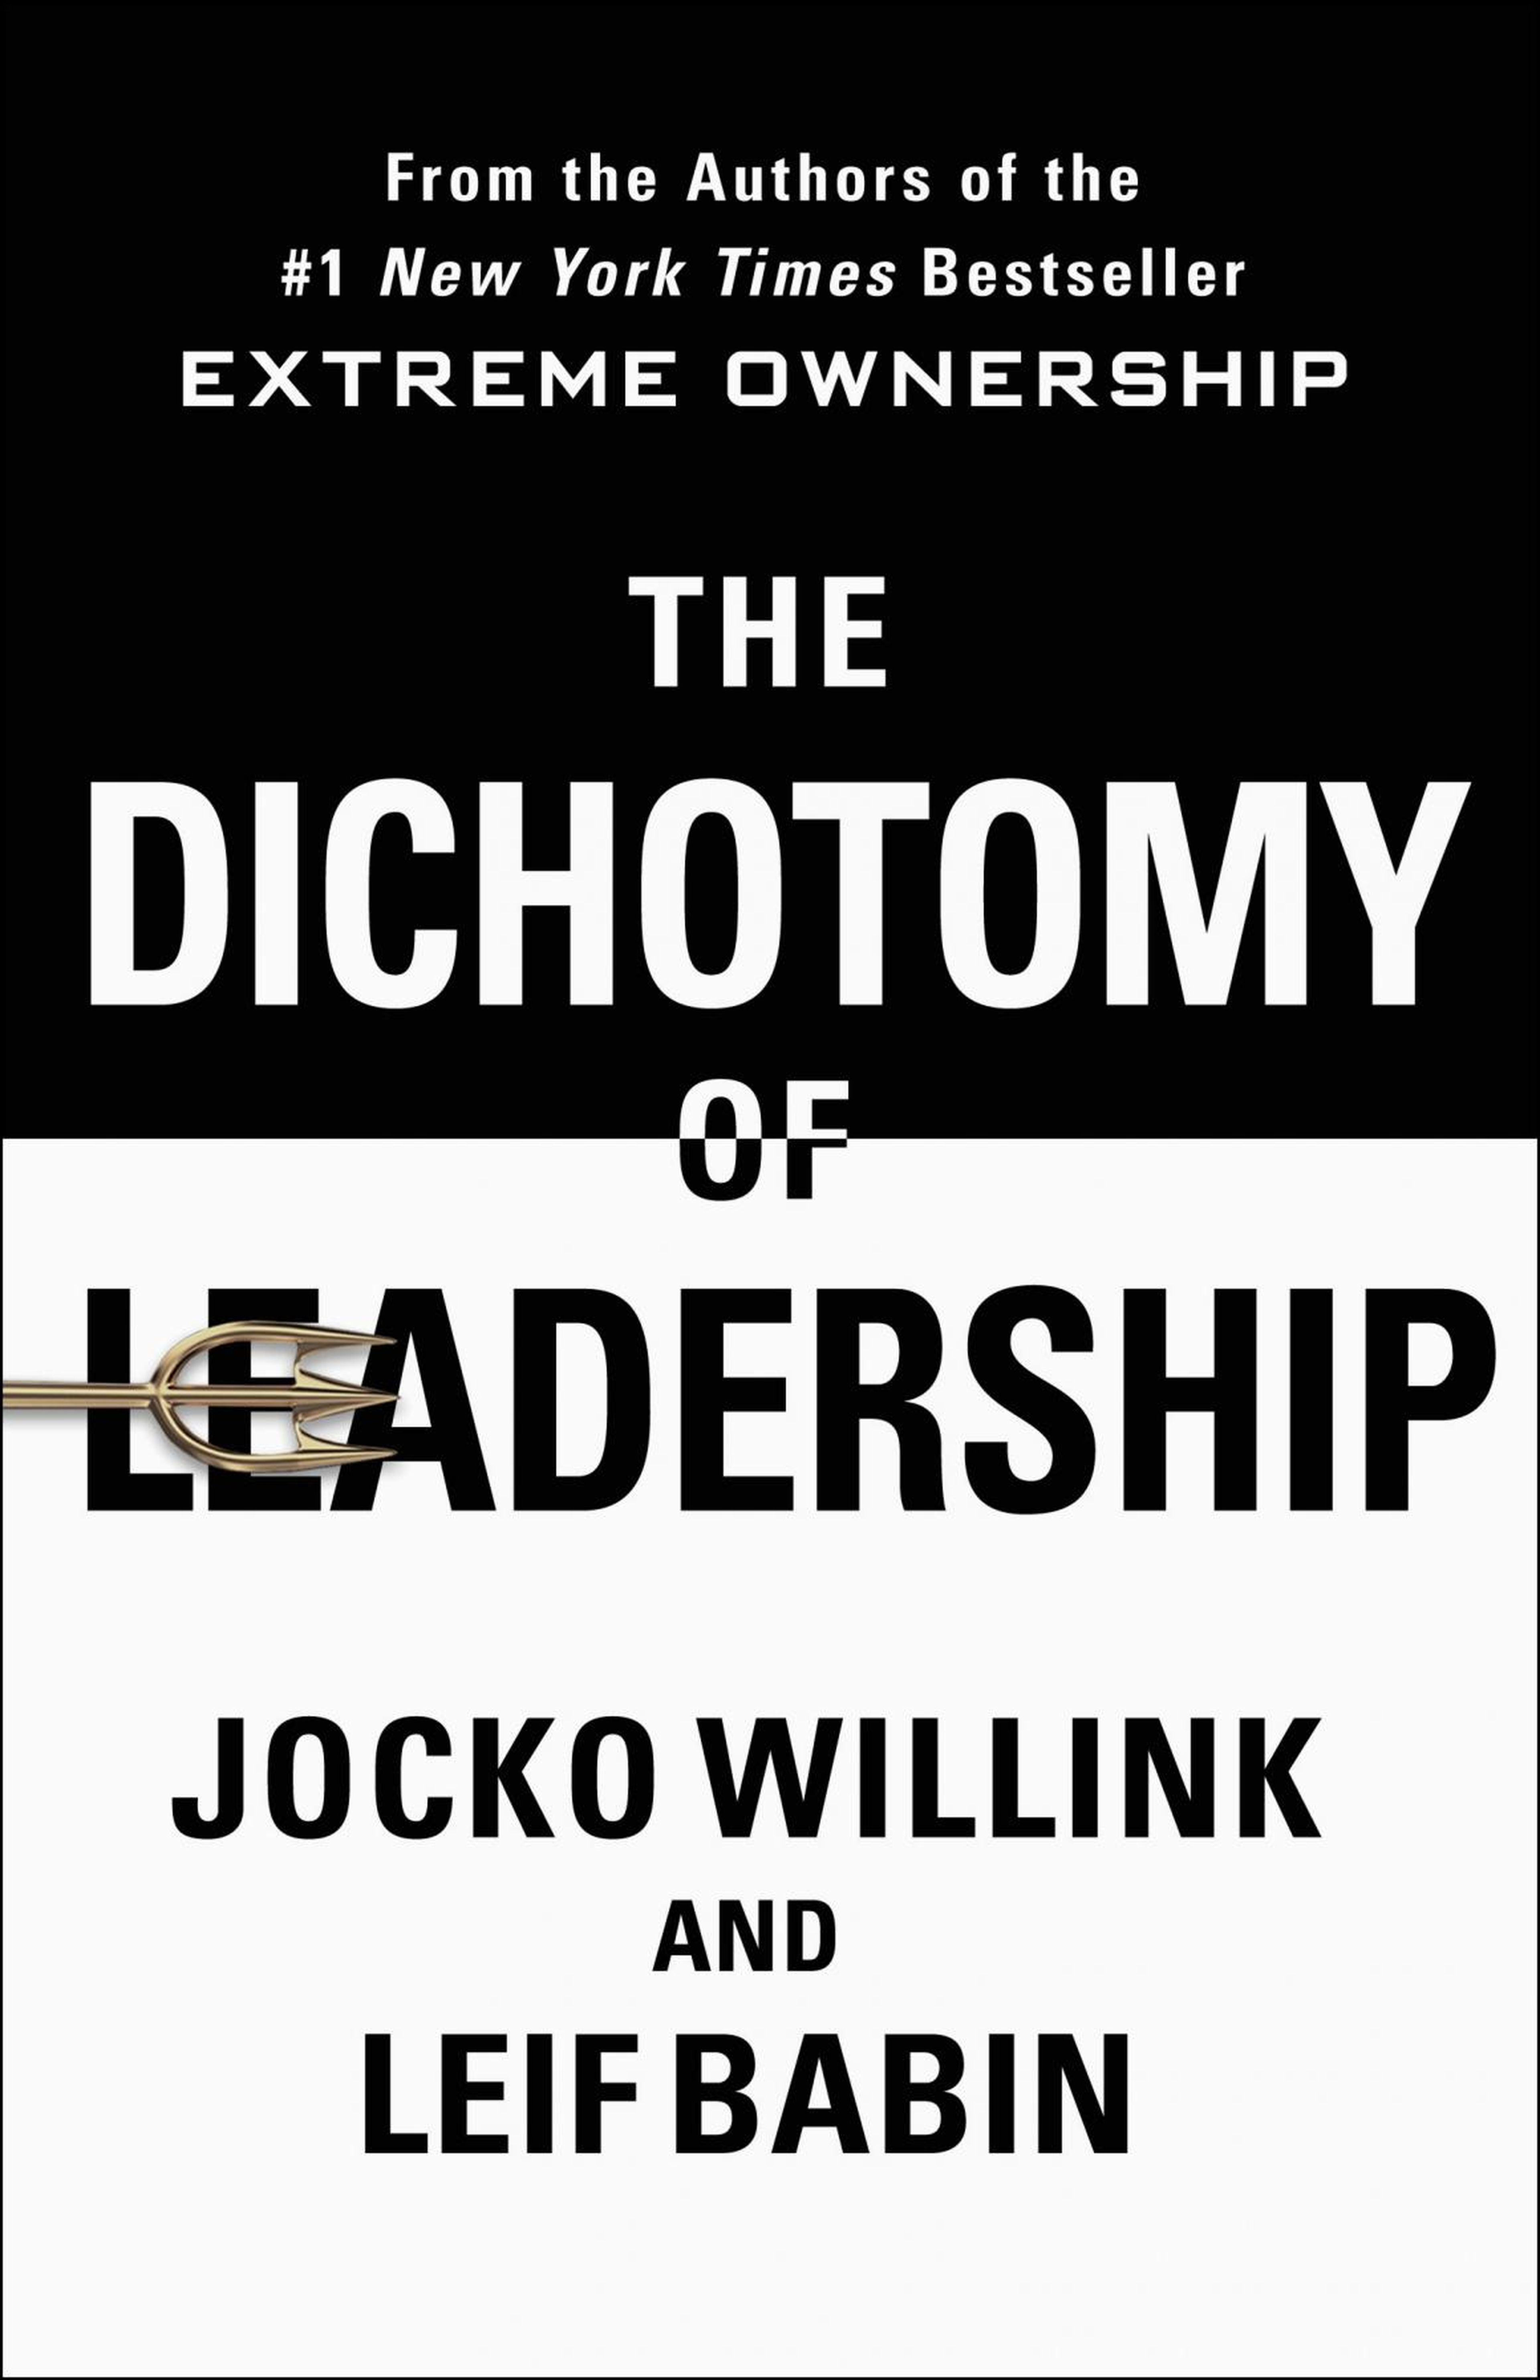 "The Dichotomy of Leadership" is scheduled to be published by St. Martin's Press on Sept. 25.